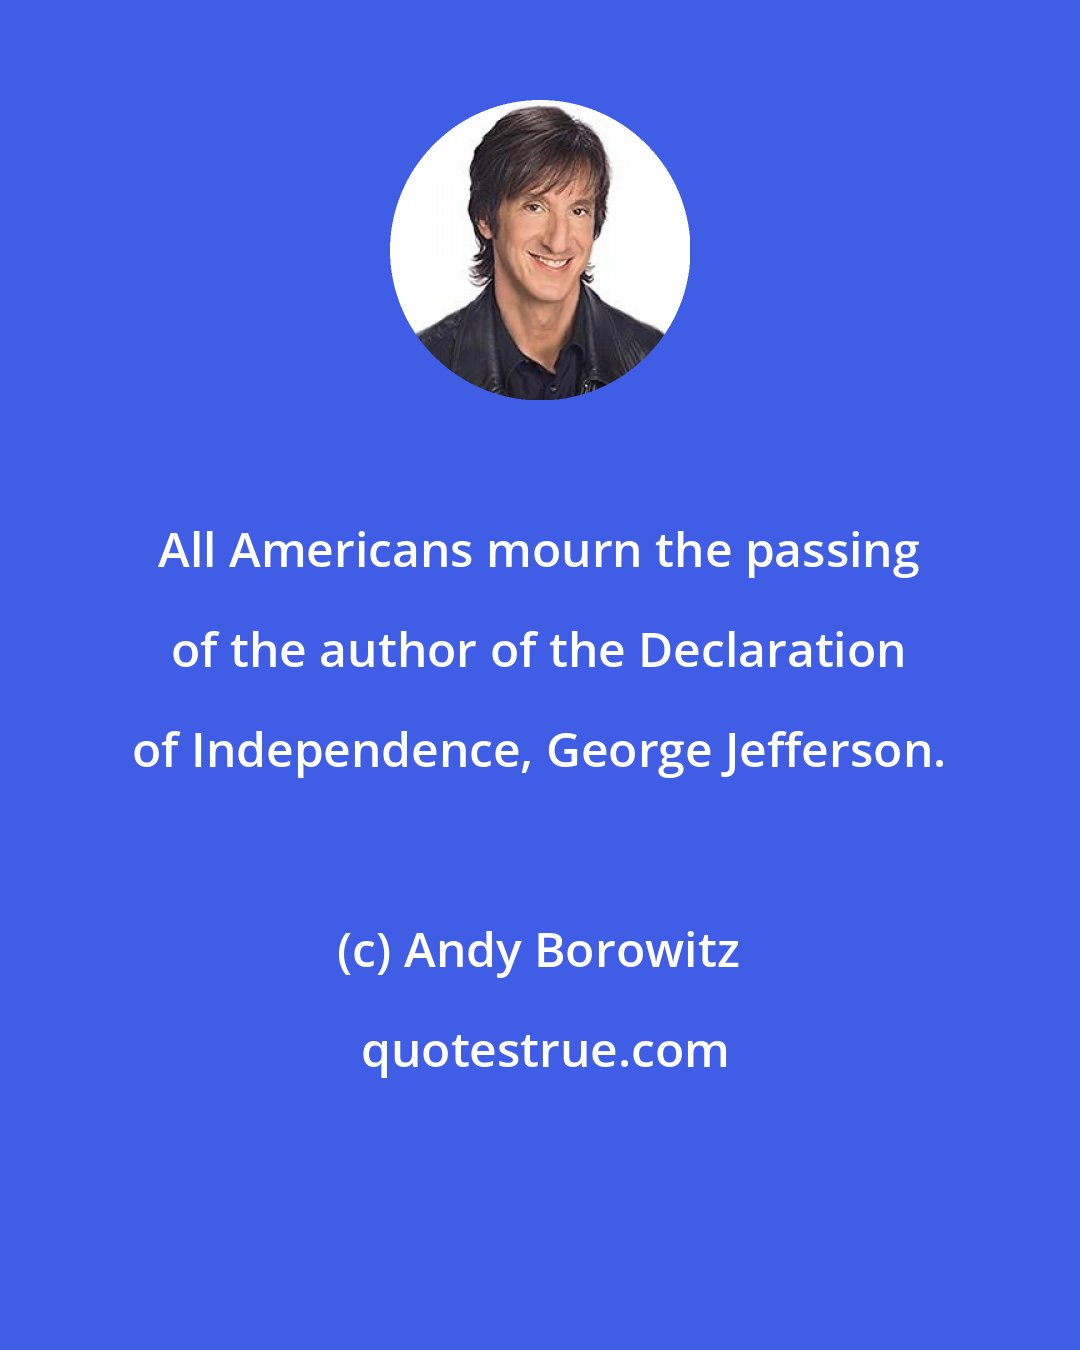 Andy Borowitz: All Americans mourn the passing of the author of the Declaration of Independence, George Jefferson.